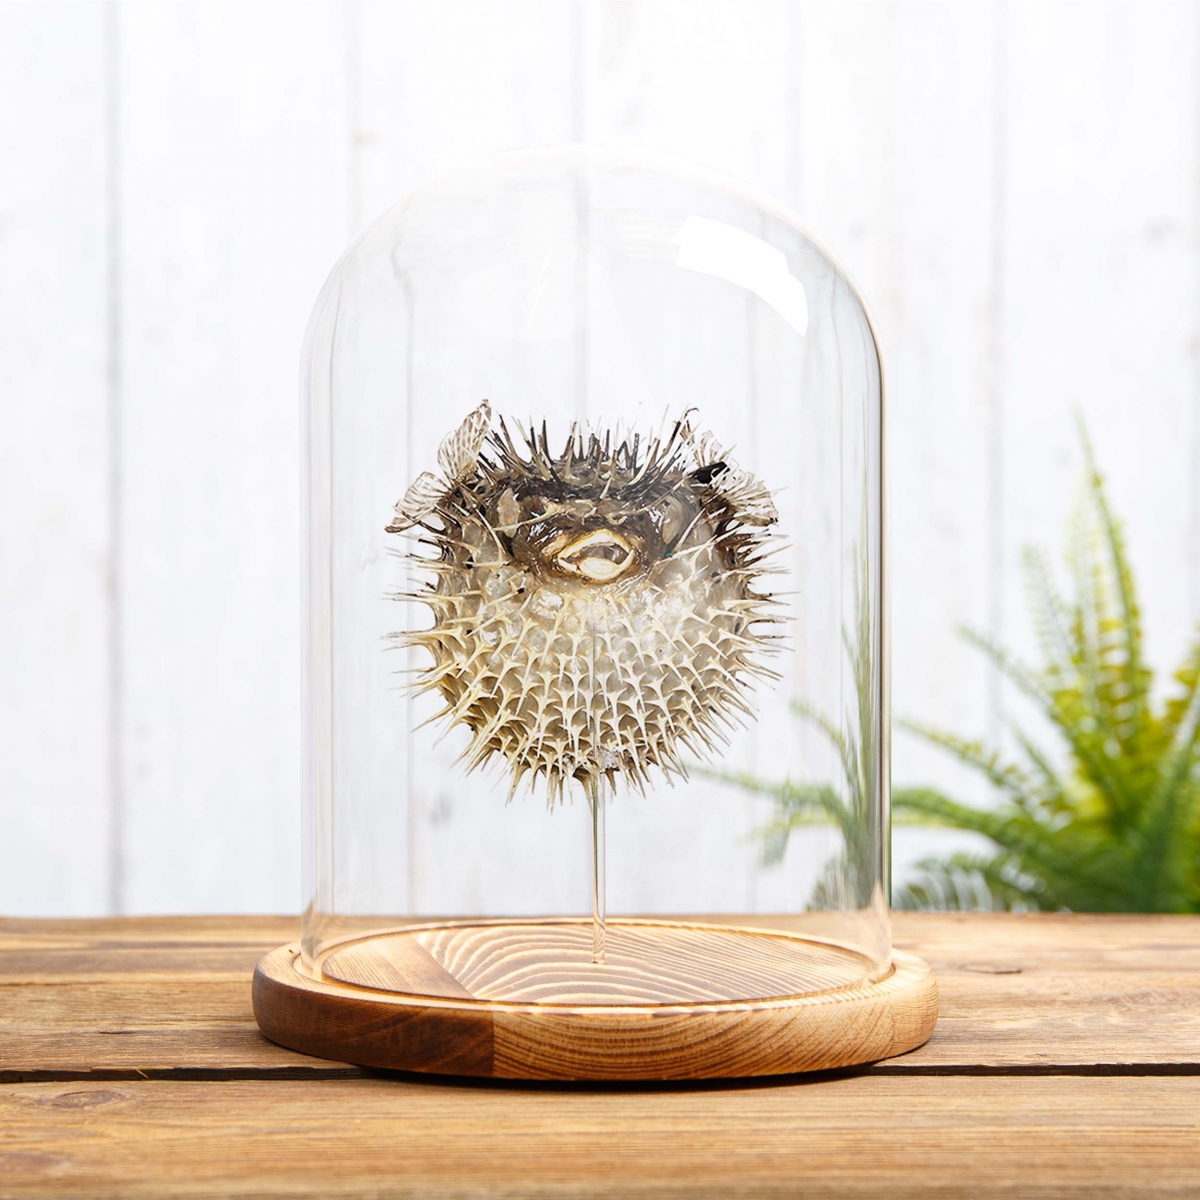 Puffer Fish in Glass Dome with Wooden Base (Tetraodontidae)